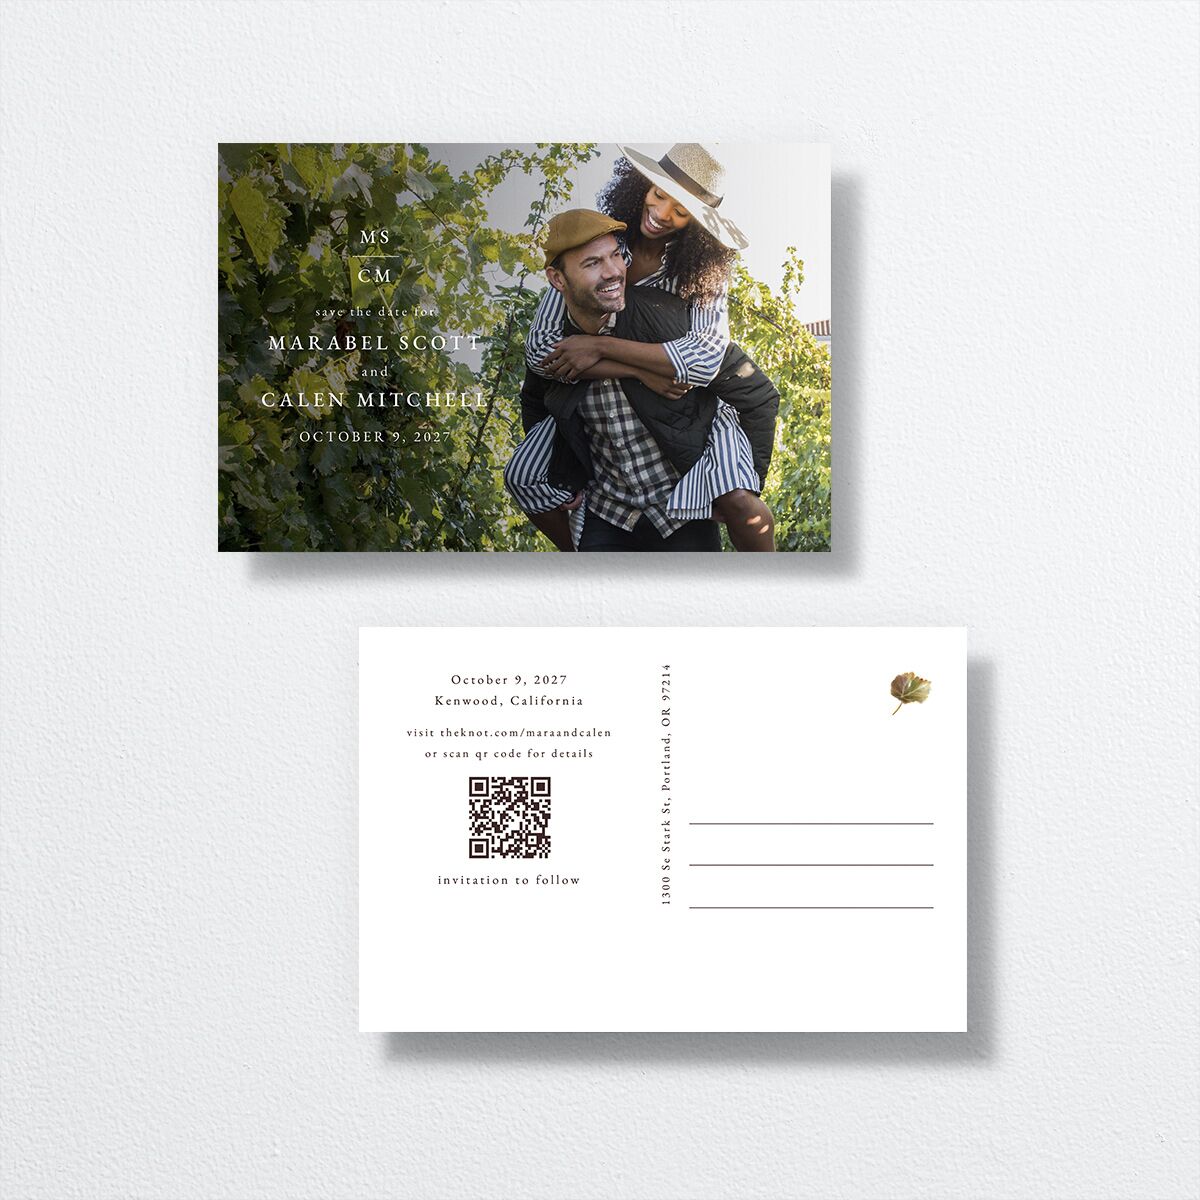 Romantic Vineyard Save the Date Postcards front-and-back